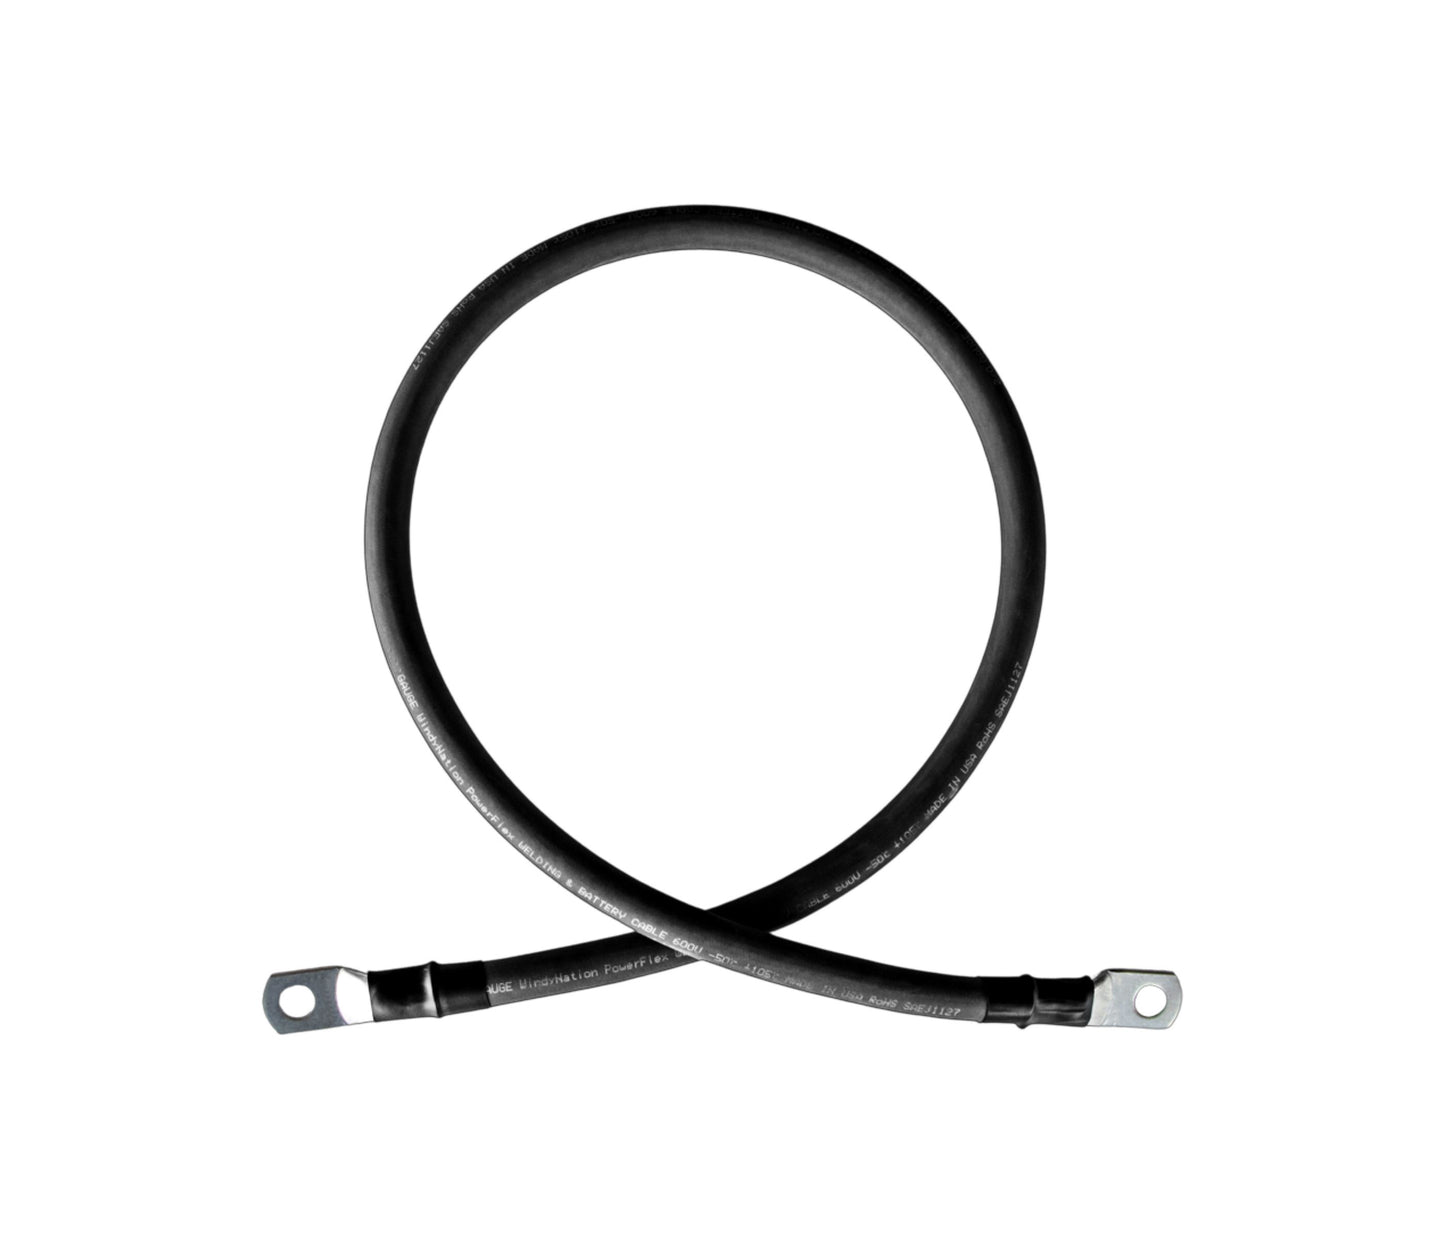 4/0 Gauge (AWG) Single Black Pure Copper Battery Cable Wire with Lug Connector Ring Terminals